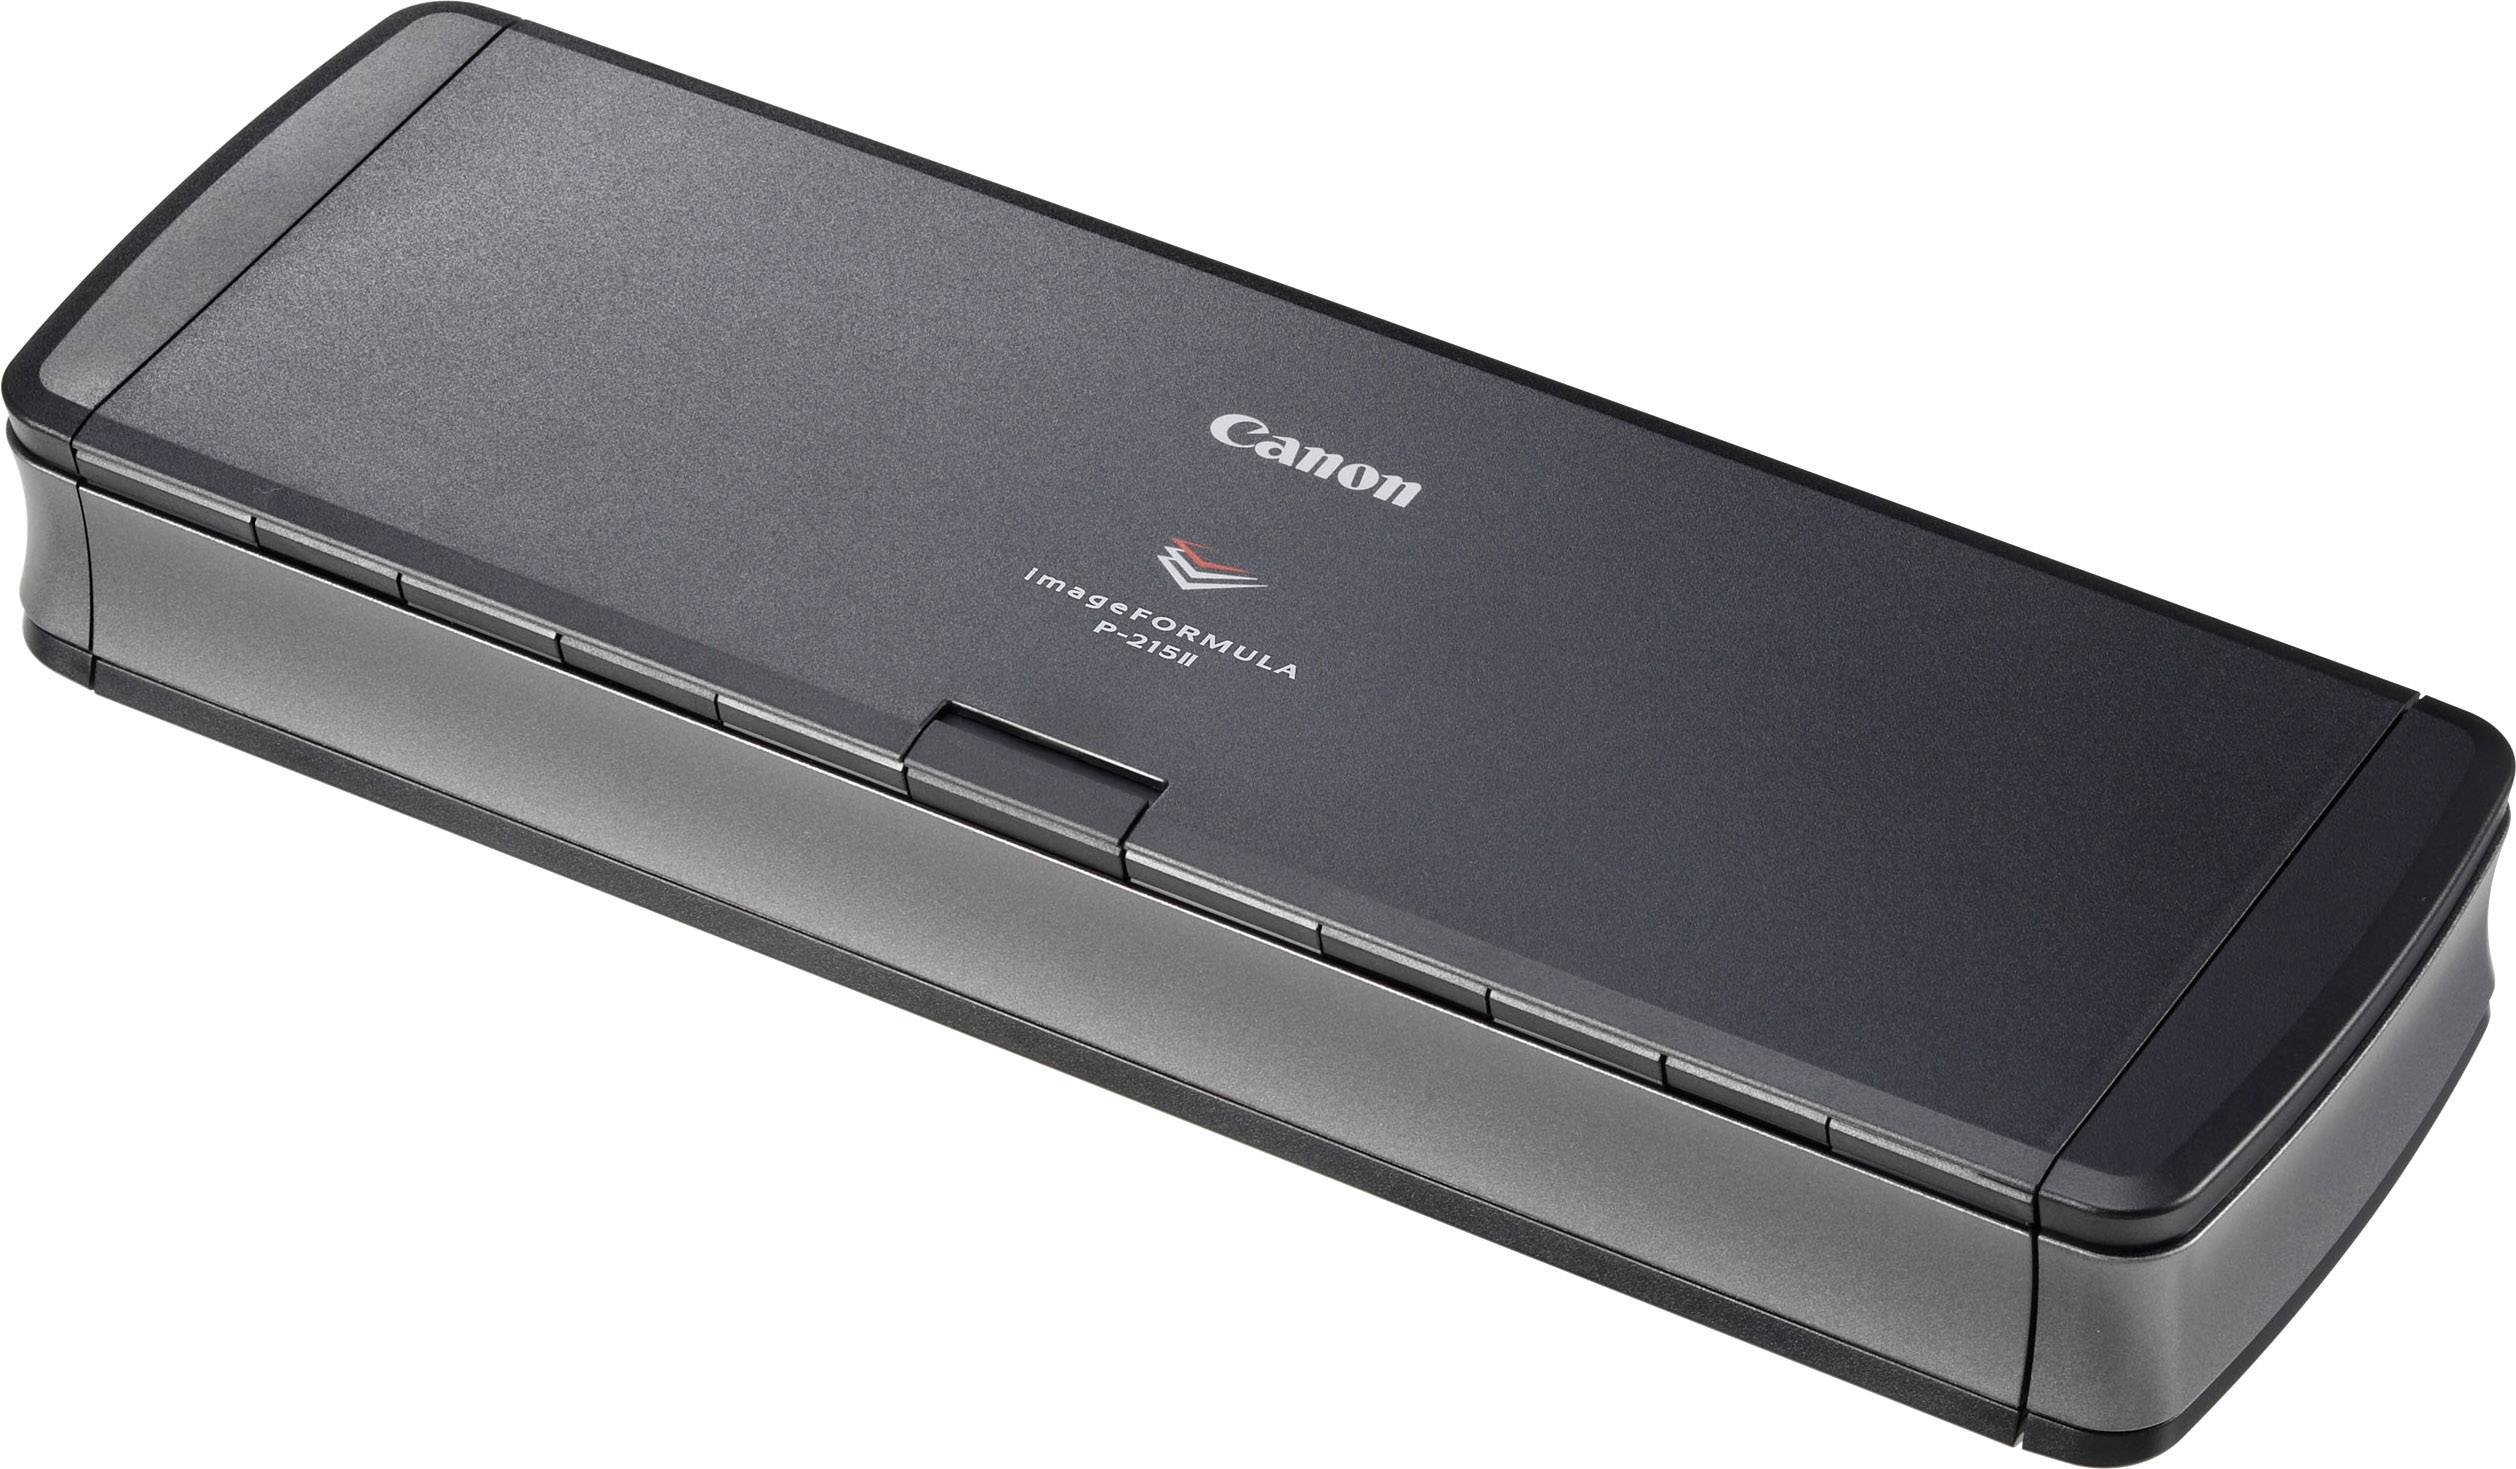 best portable scanner for documents and photos